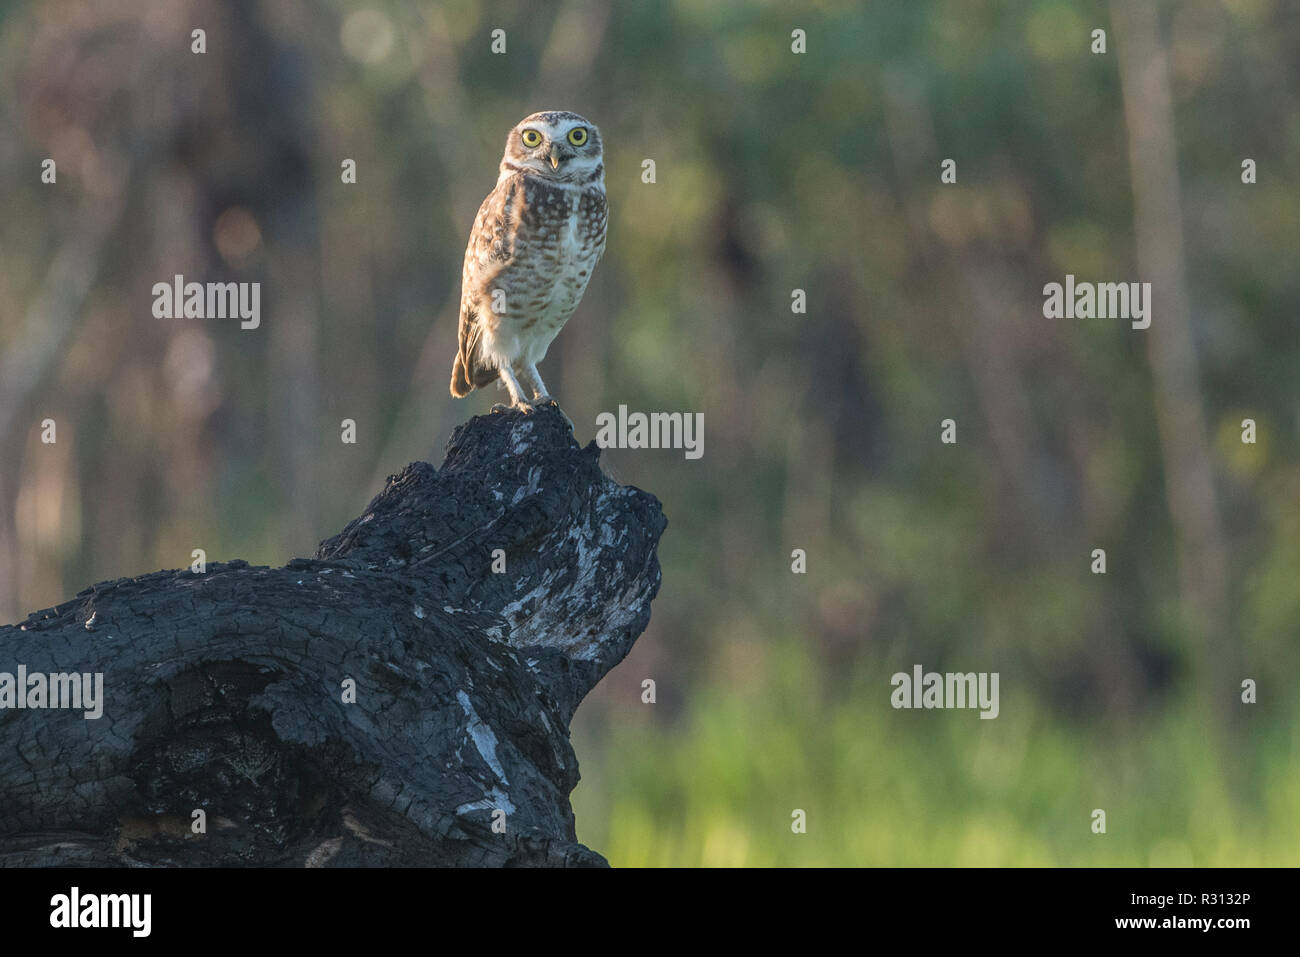 A burrowing owl (Athene cunicularia) from Madre de Dios, Peru.  The owl has been expanding its range in the area as amazon jungle is felled. Stock Photo